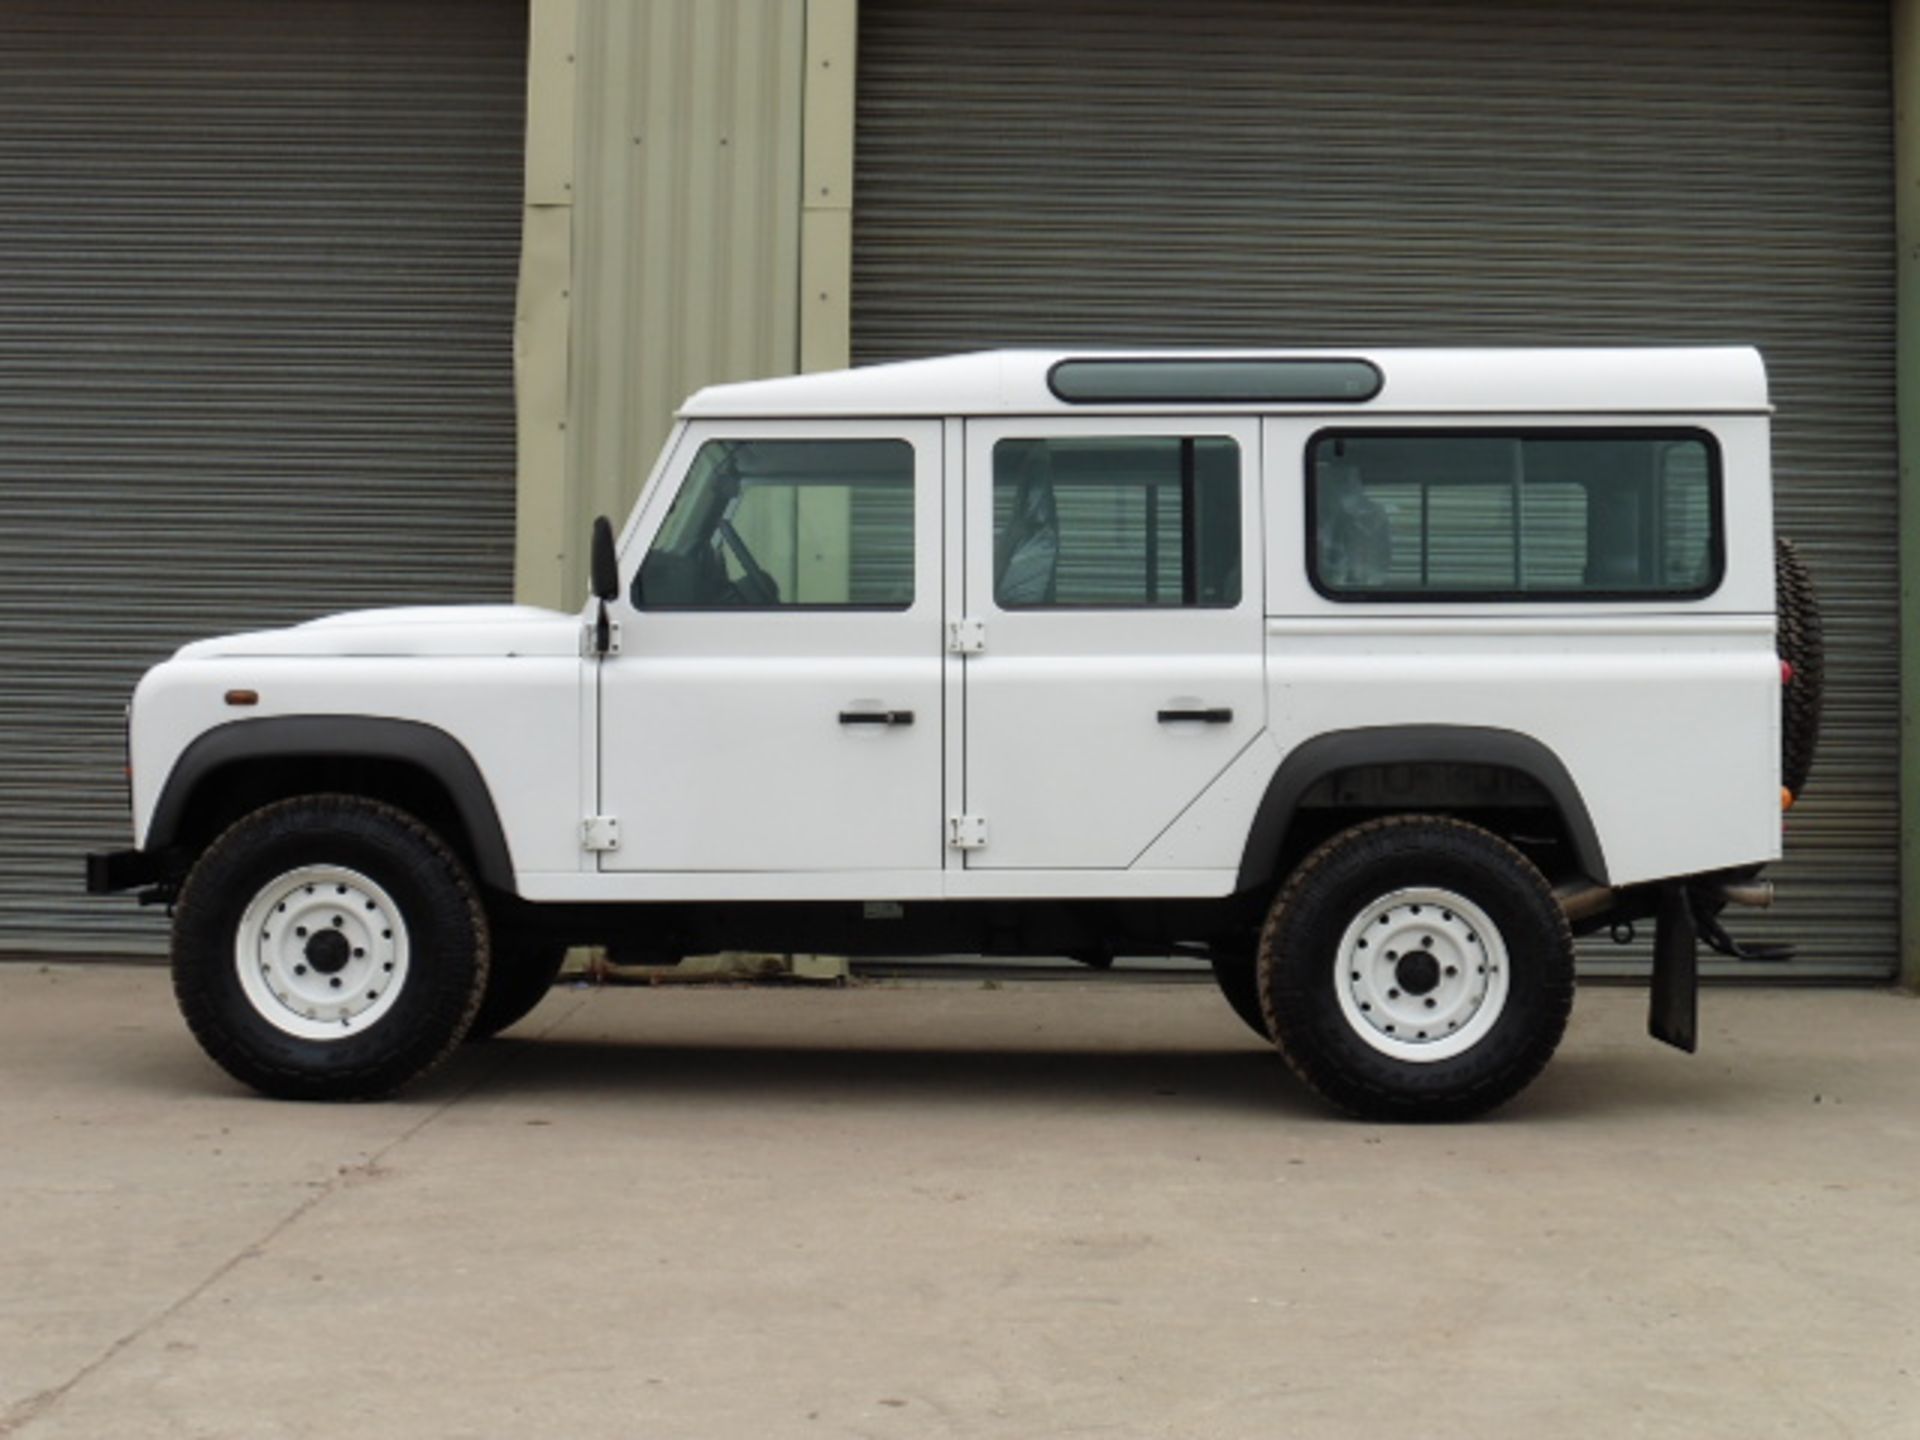 Delivery Mileage 2013 model year Land Rover Defender 110 5 door station wagon LHD - Image 4 of 20